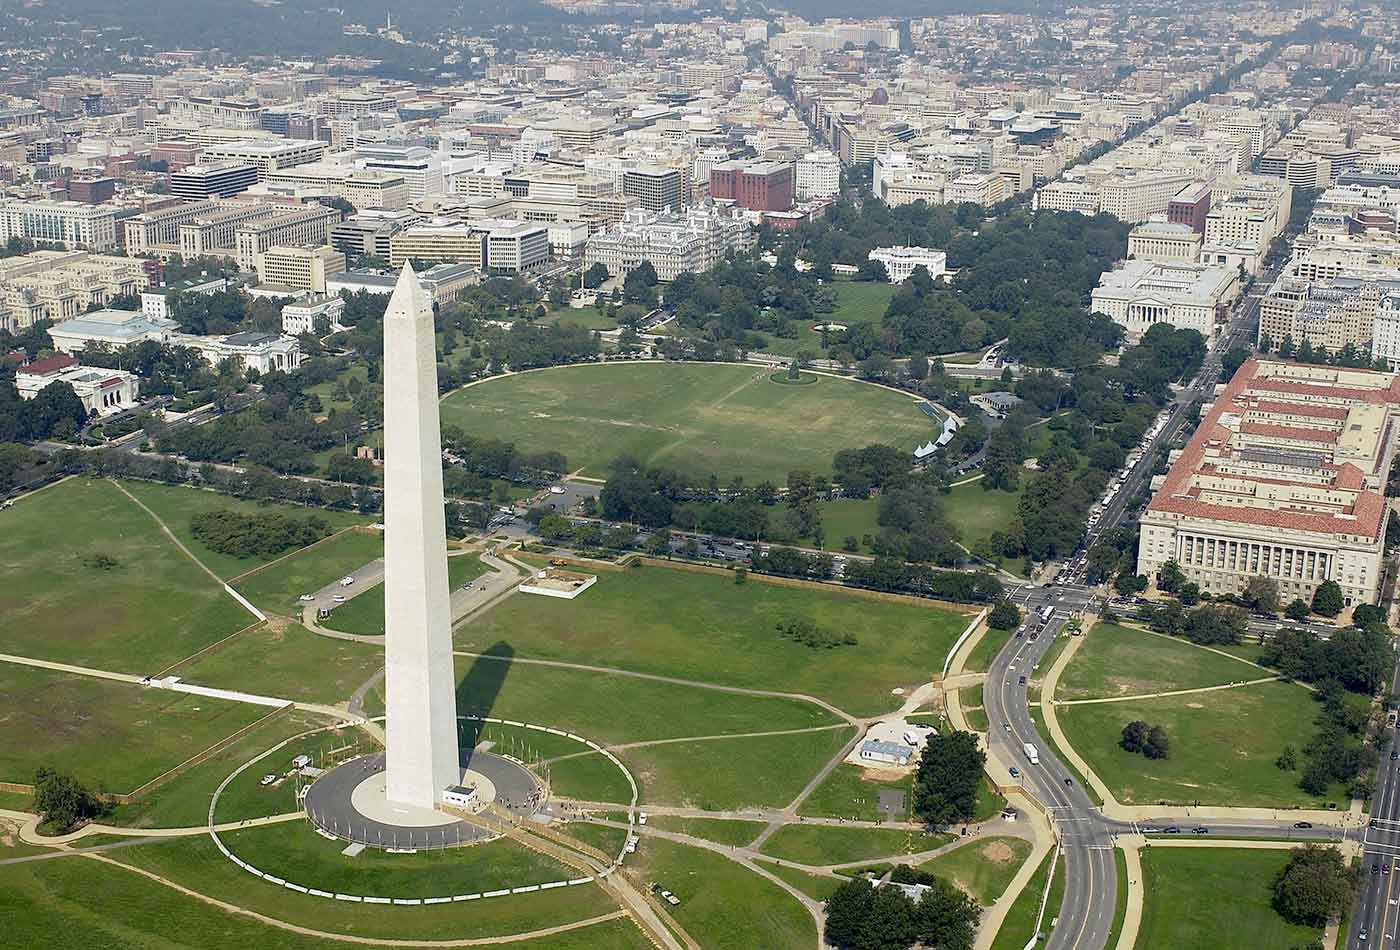 Aerial view of the Washington Monument with the White House in the background.